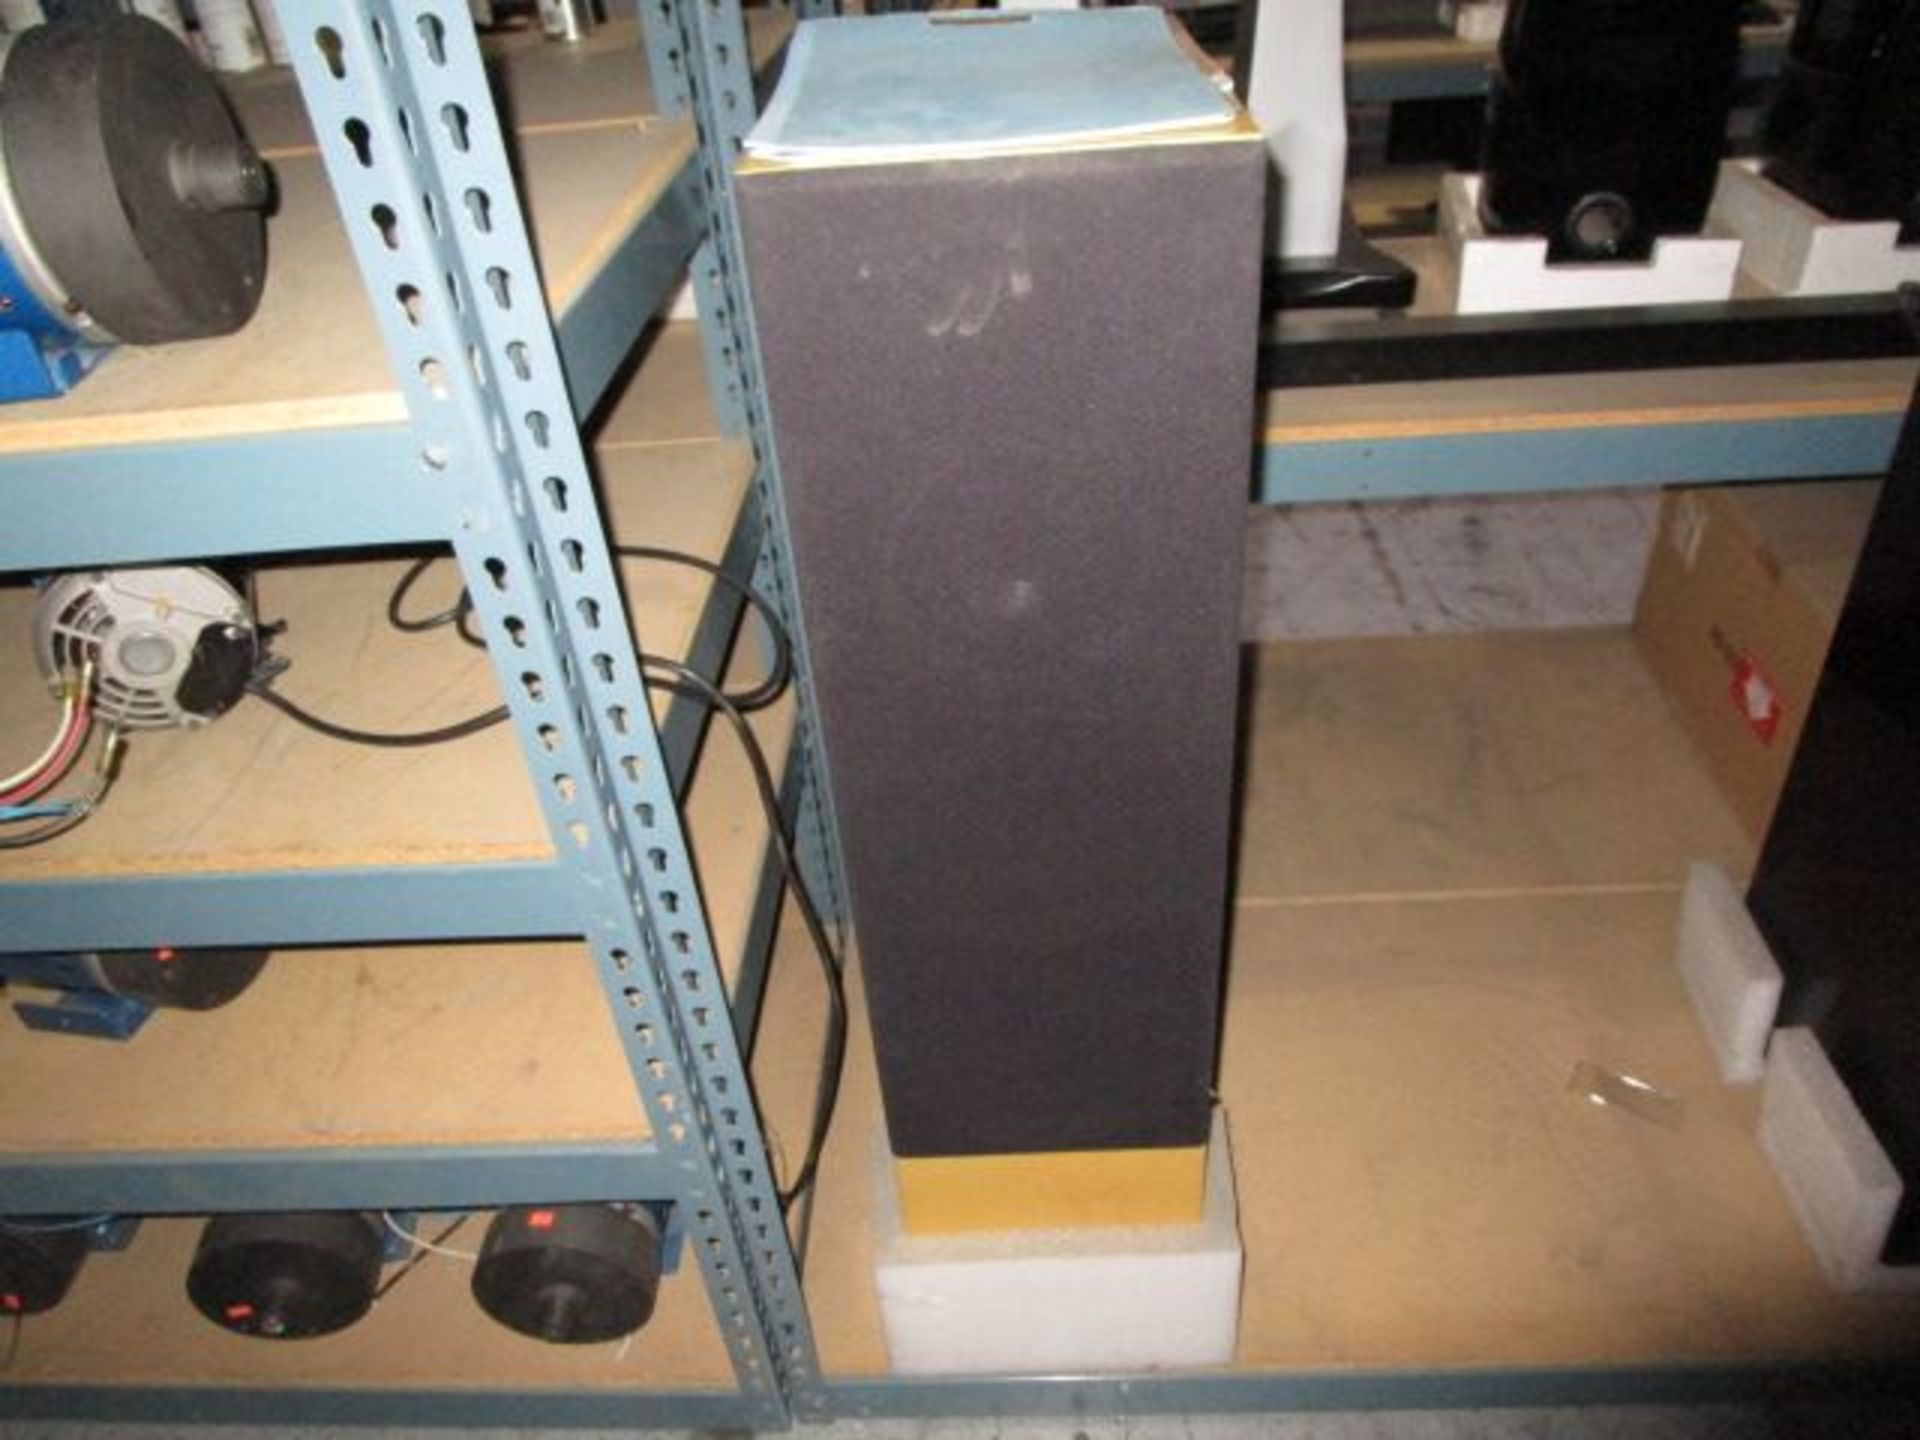 SHELVING UNIT OF RECEIVER SYSTEMS AND SPEAKERS - Image 8 of 8